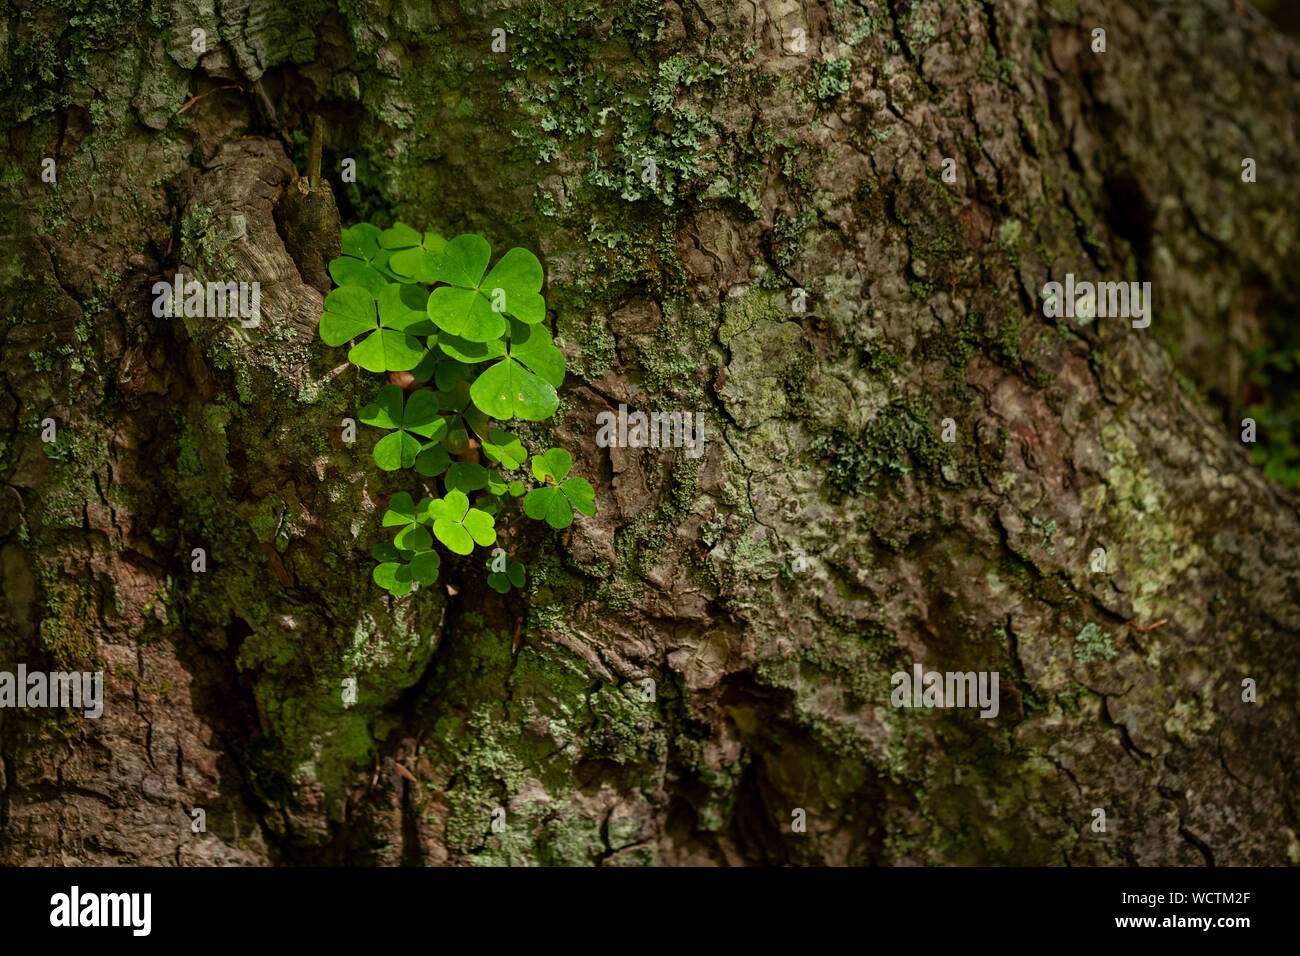 lush clover leaf on a bark in the forest Stock Photo